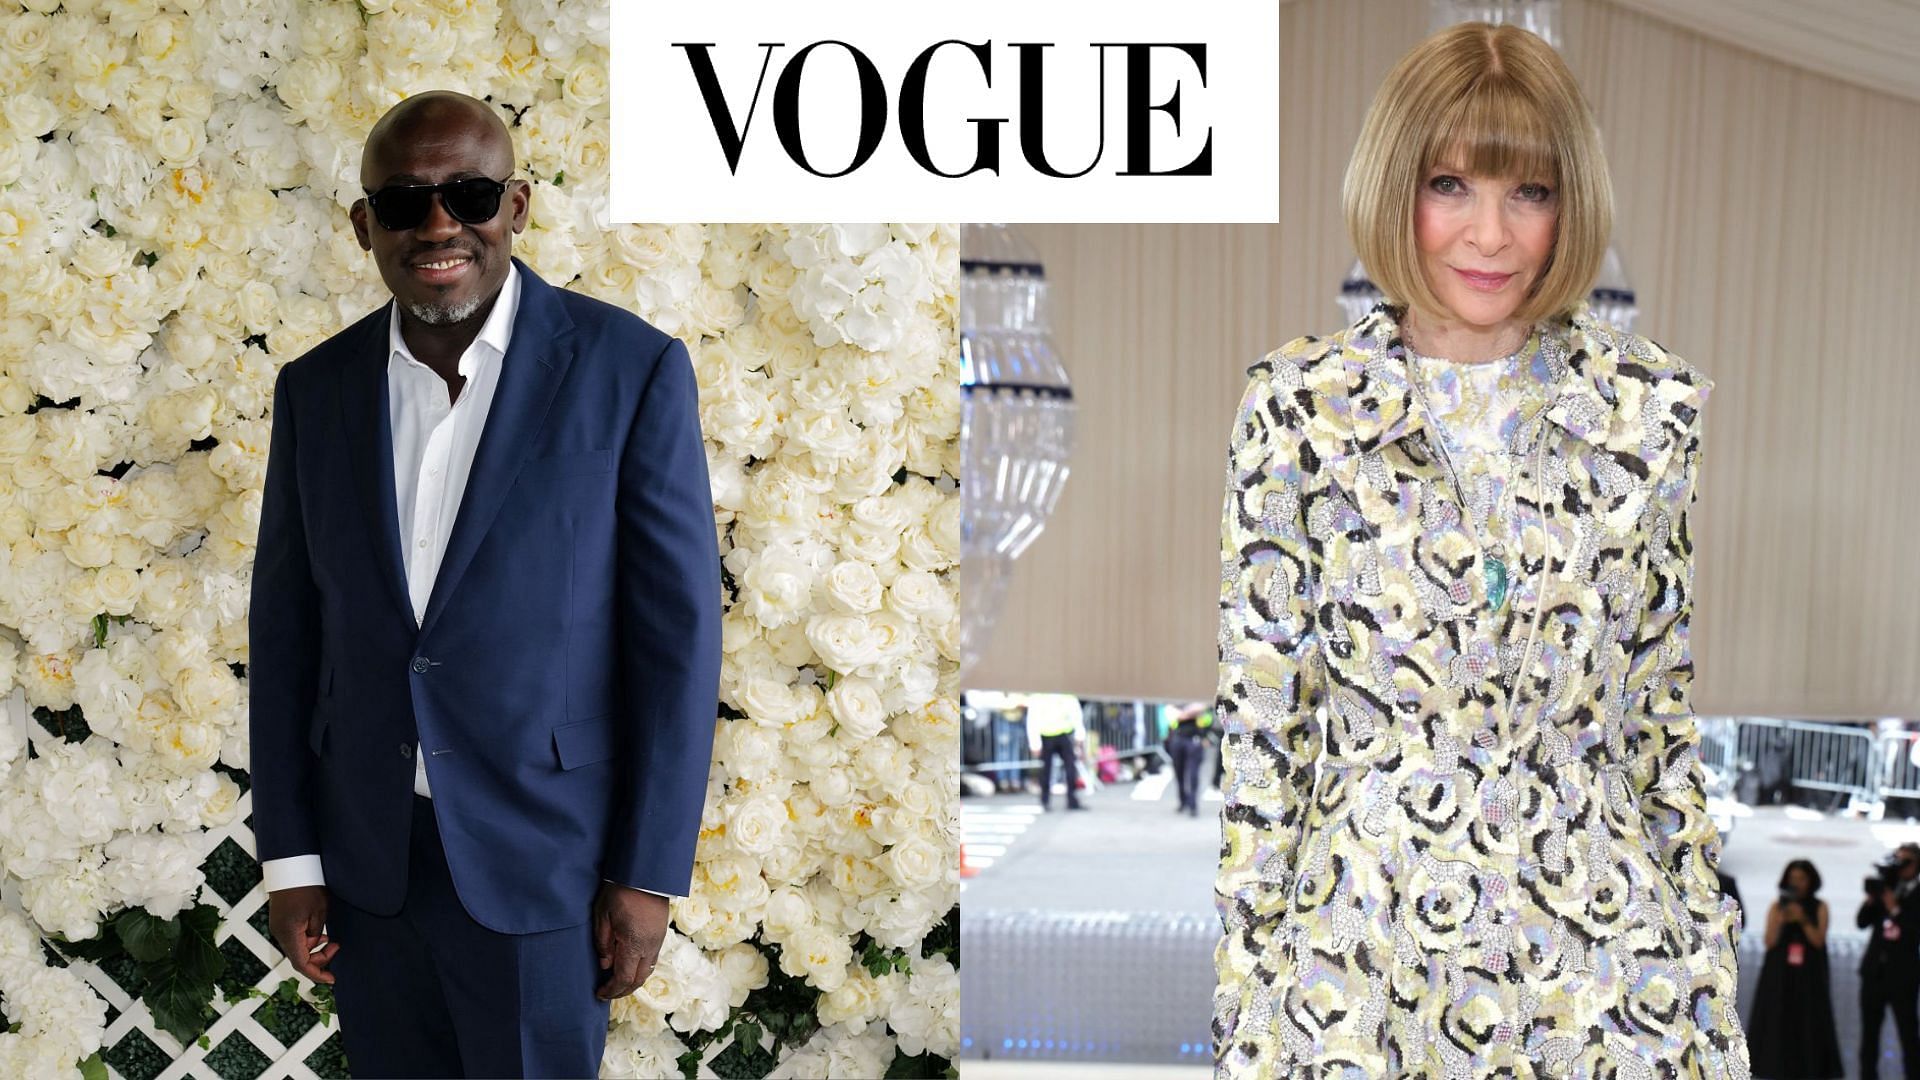 Power struggles between Edward Enninful and Anna Wintour because of Vogue World. (Images via Getty Images)